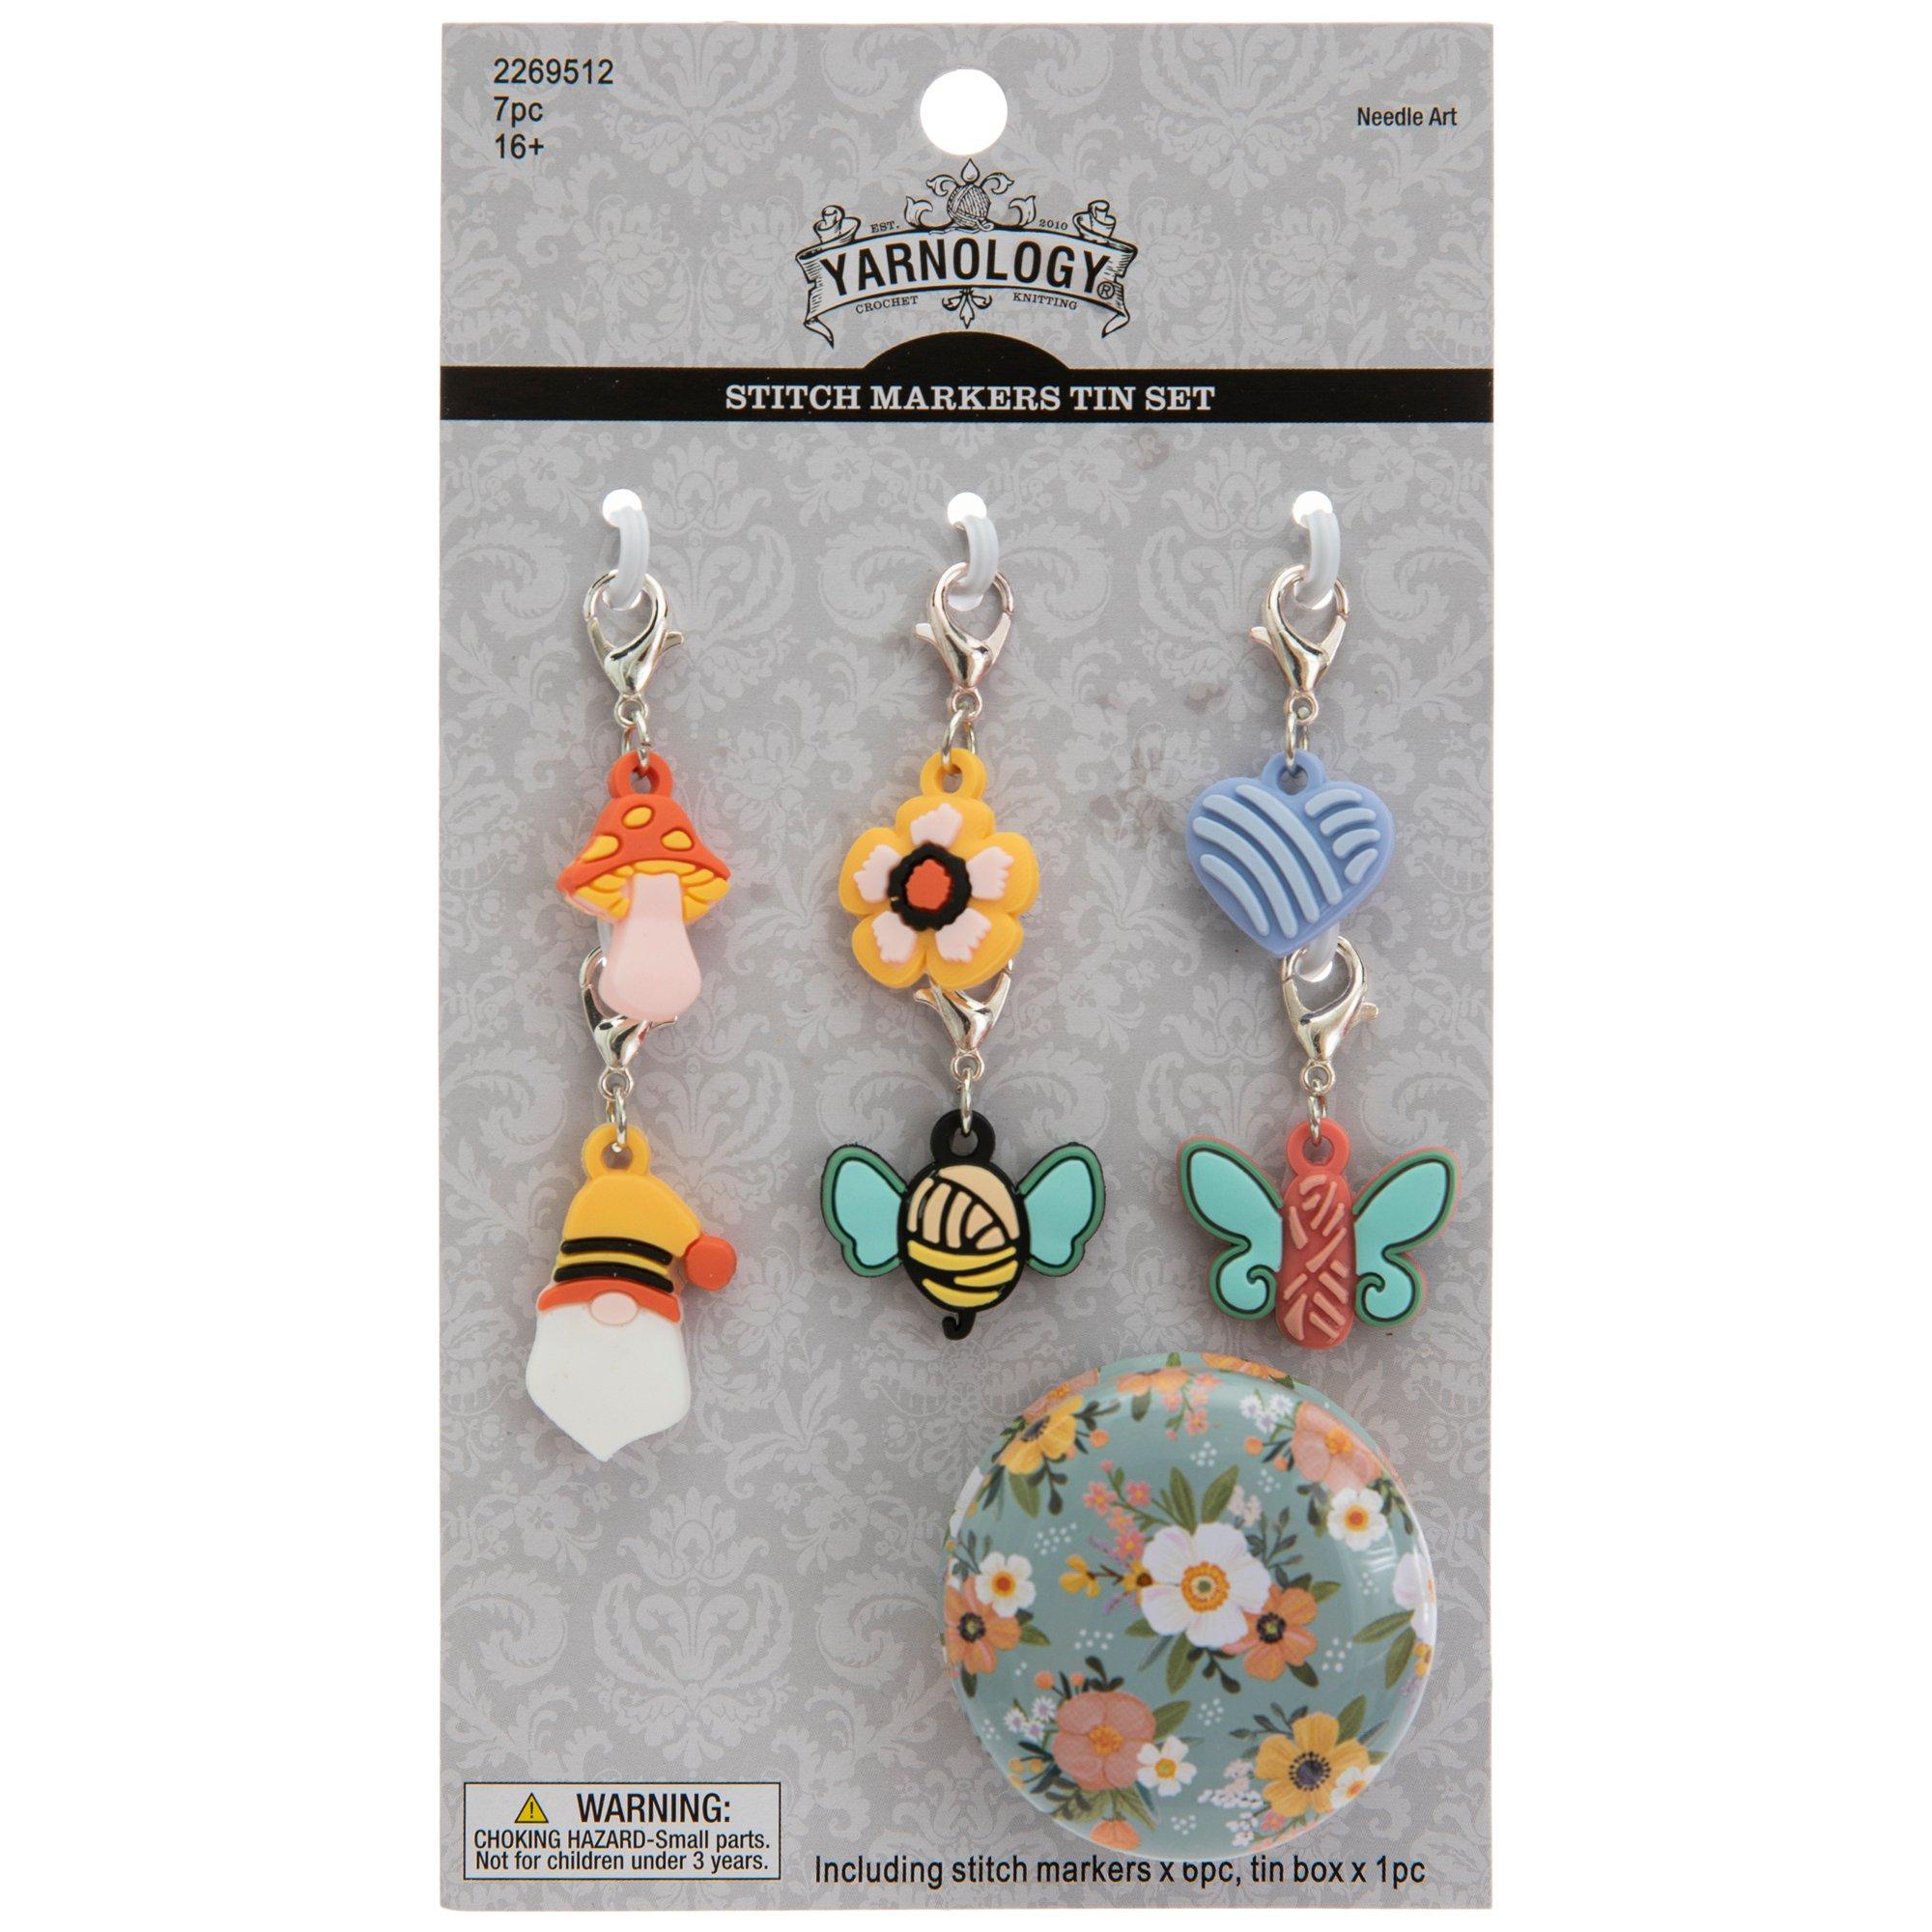 Collectible Stitch markers - Around the Table Yarns